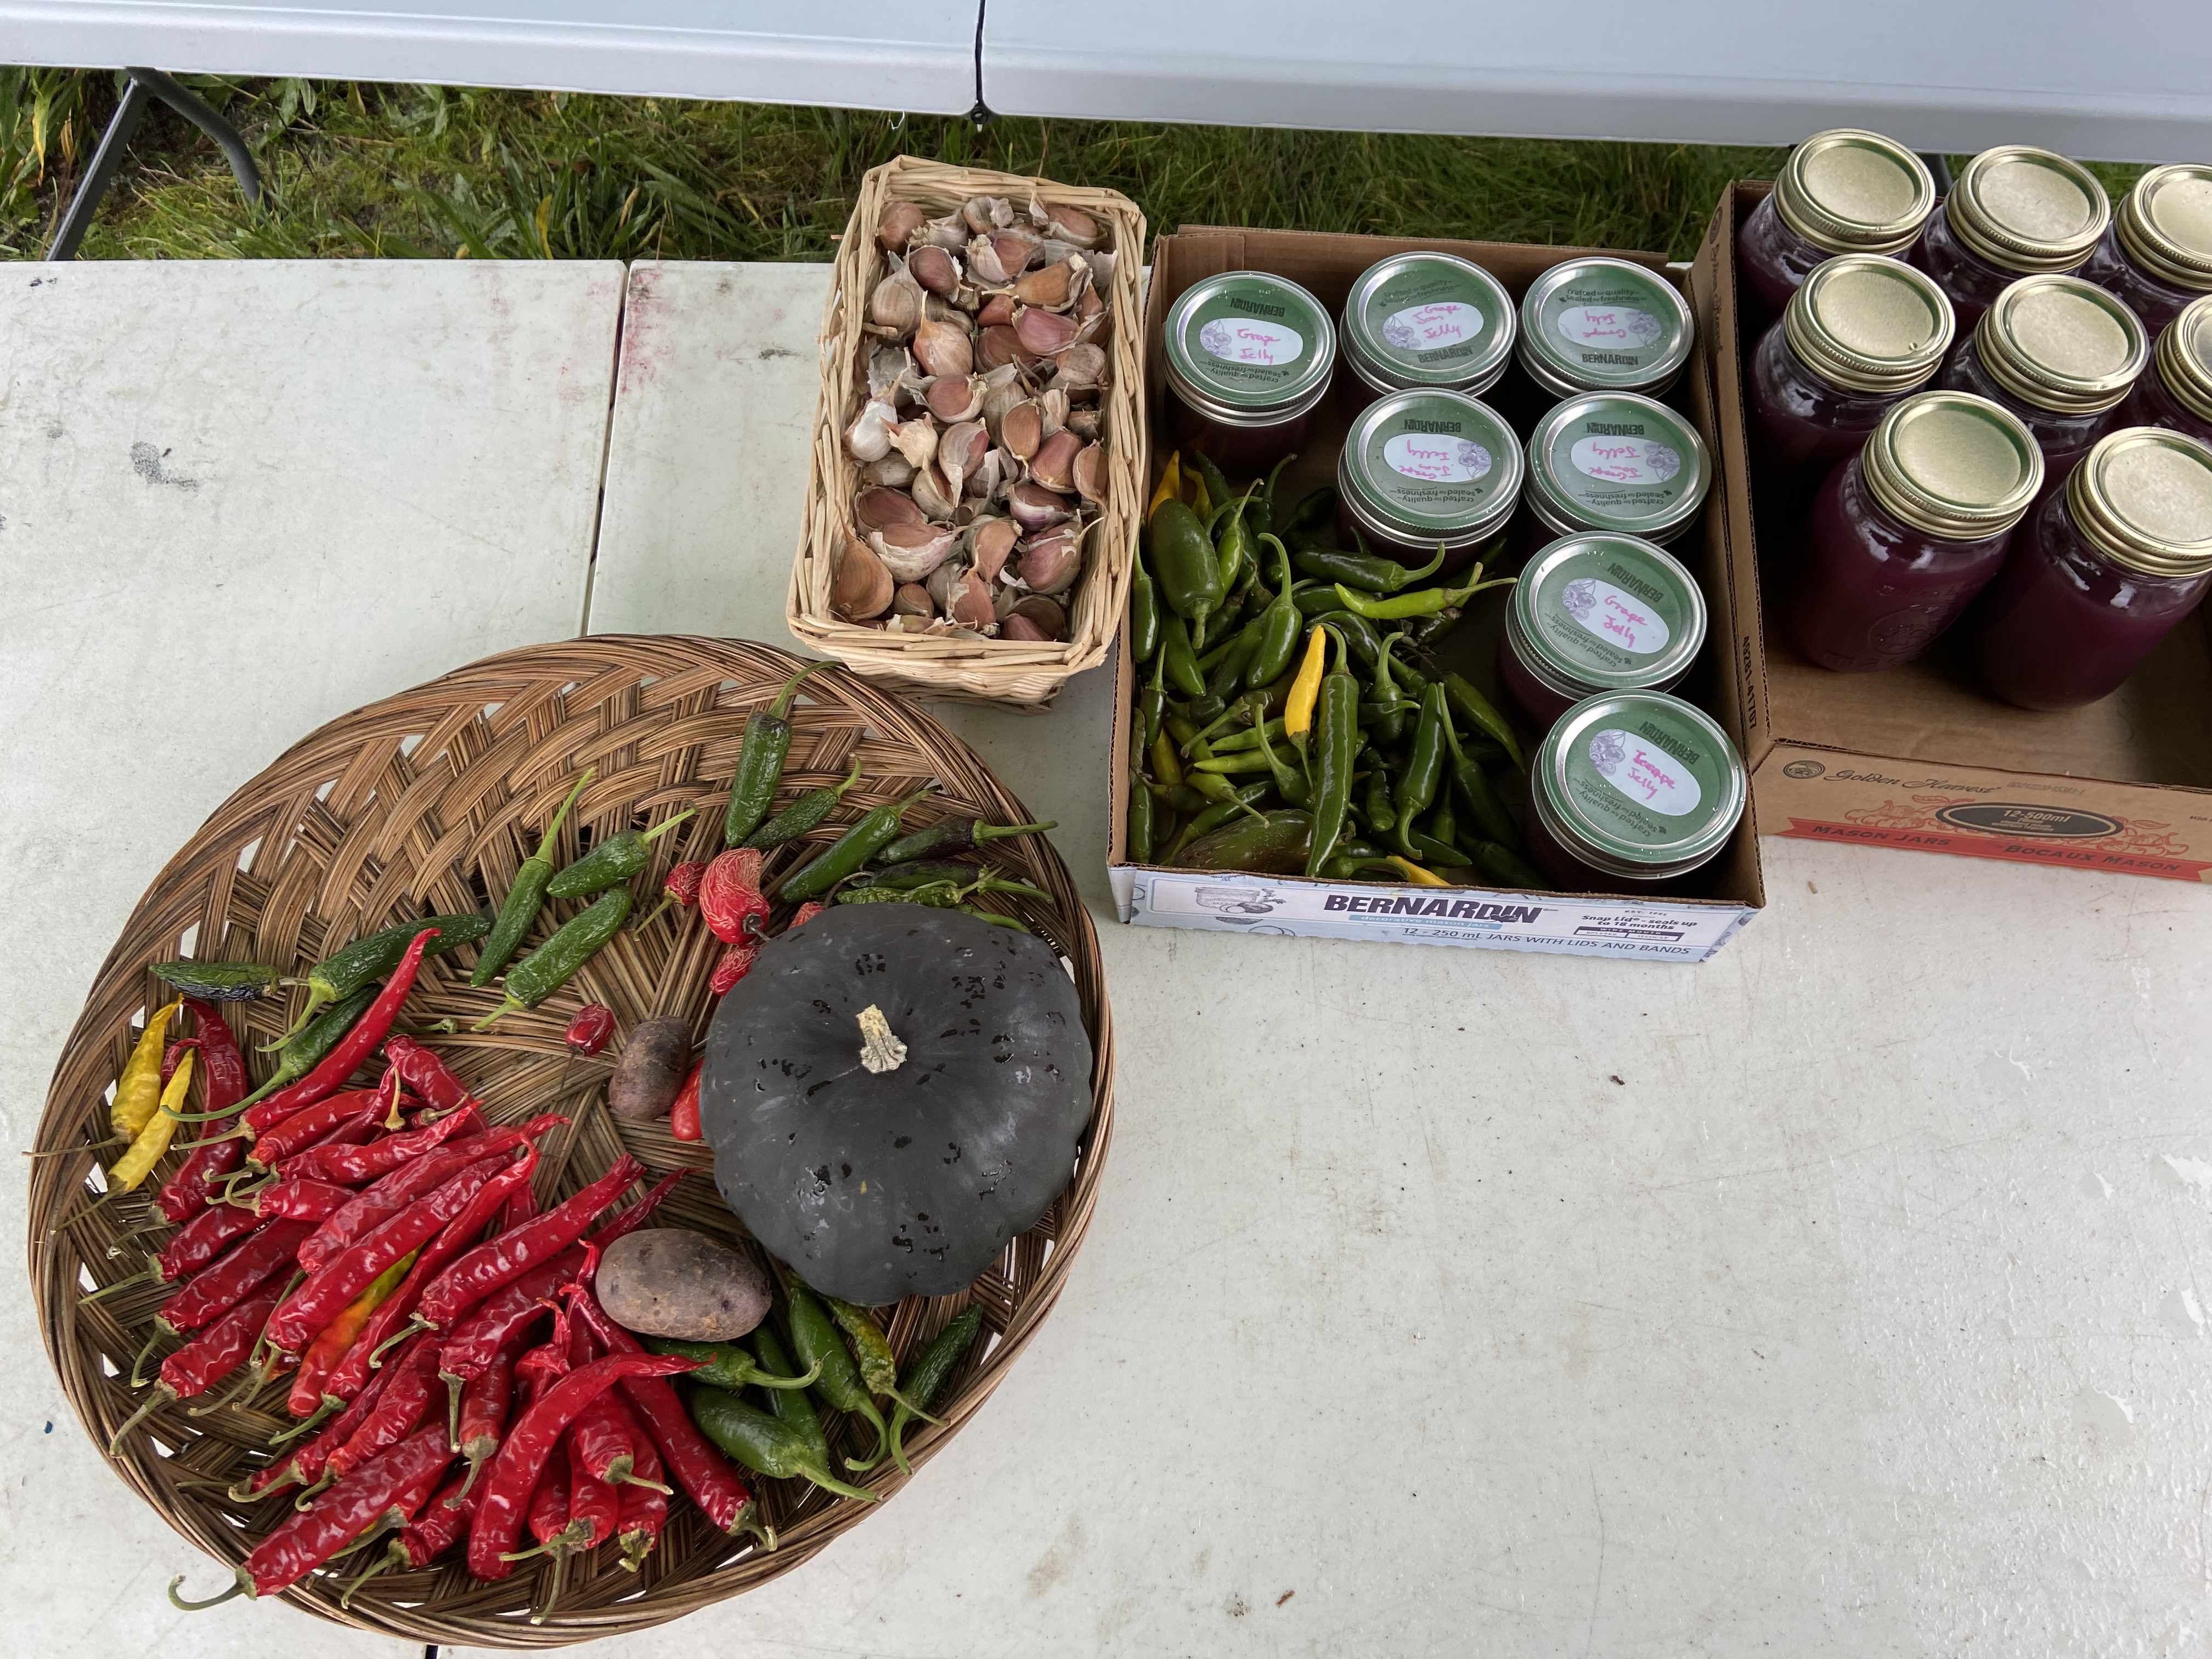 a bowl of chillies and squash, a bowl of garlic cloves and two flats of homemade preserves laid out on the table